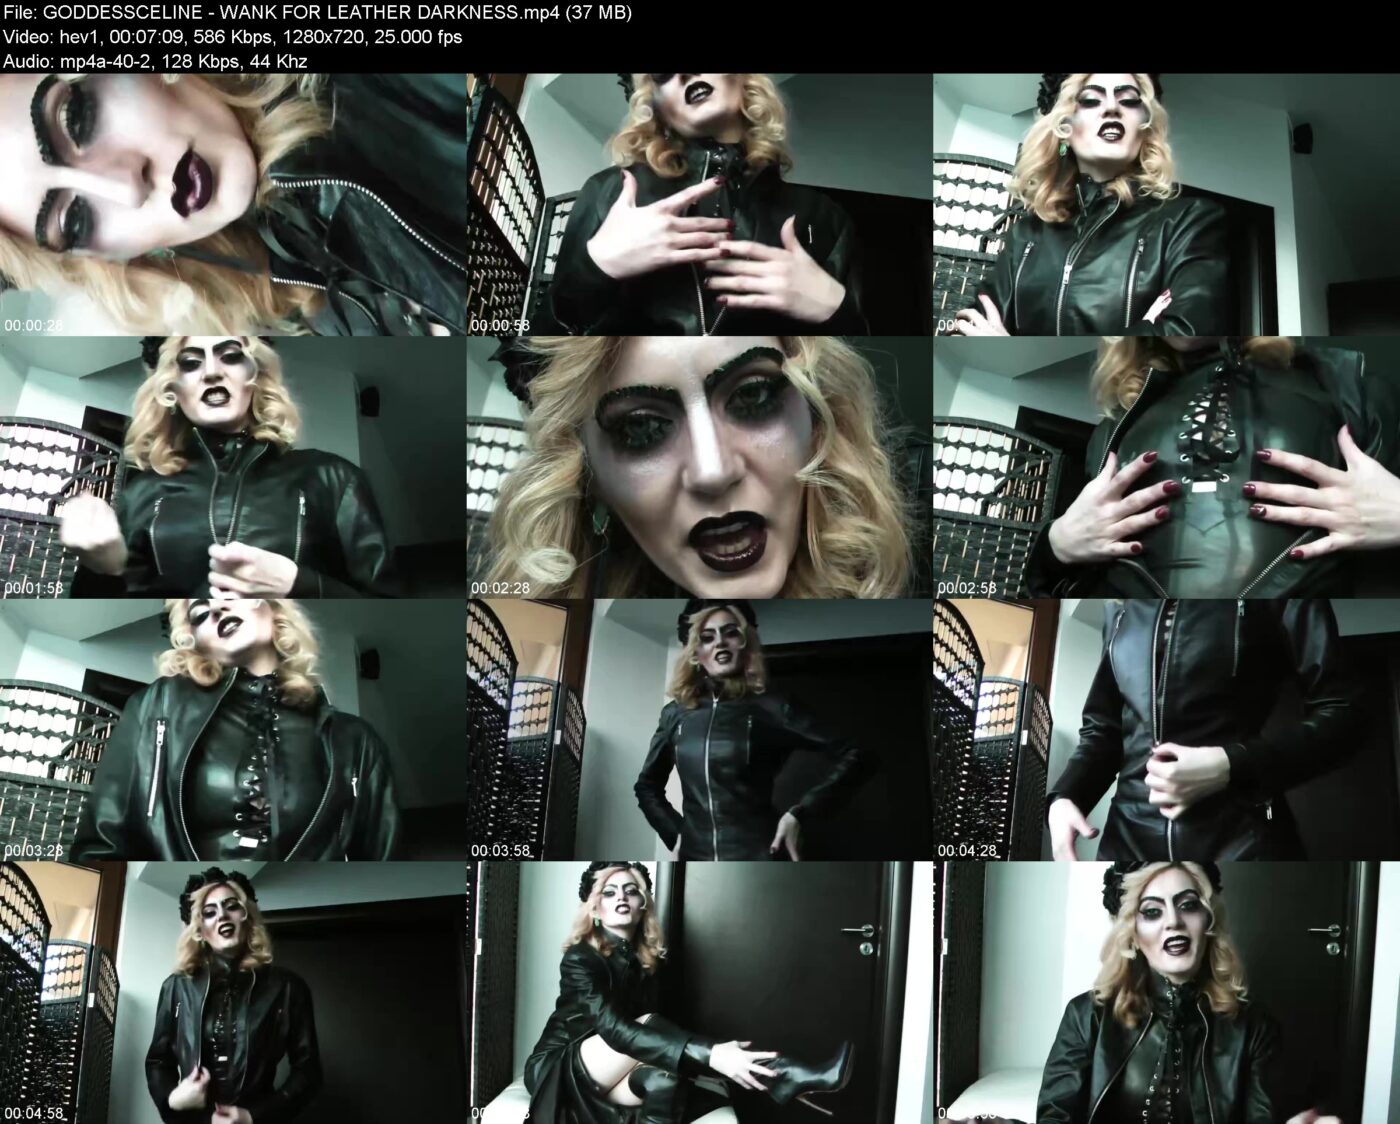 Actress: GODDESSCELINE. Title and Studio: WANK FOR LEATHER DARKNESS